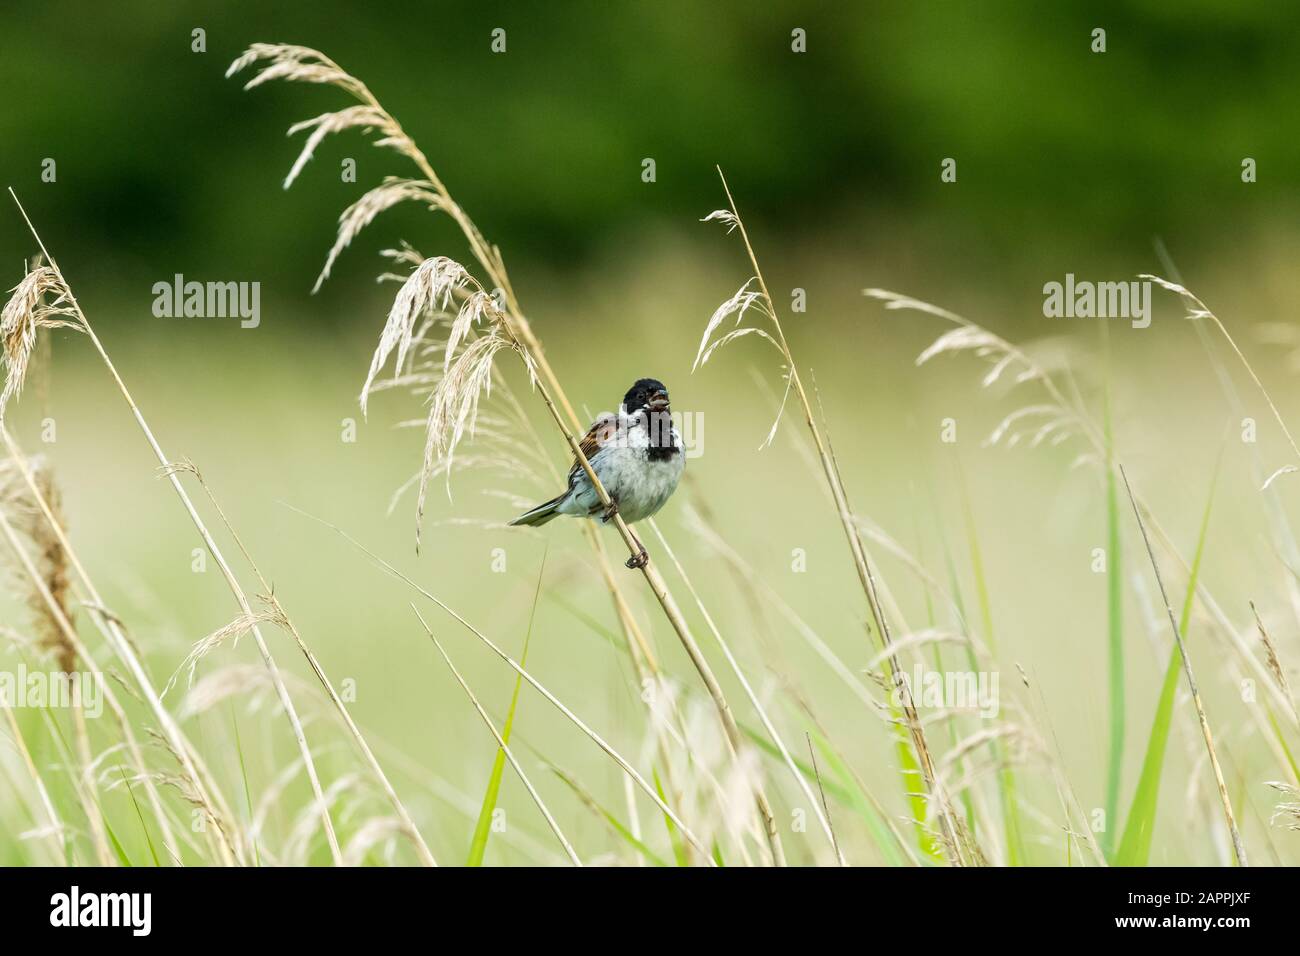 Male Reed bunting (Scientific name: Emberiza schoeniclus) perched on a grass stem and singing with beak opn in natural reed bed habitat.  Facing right Stock Photo